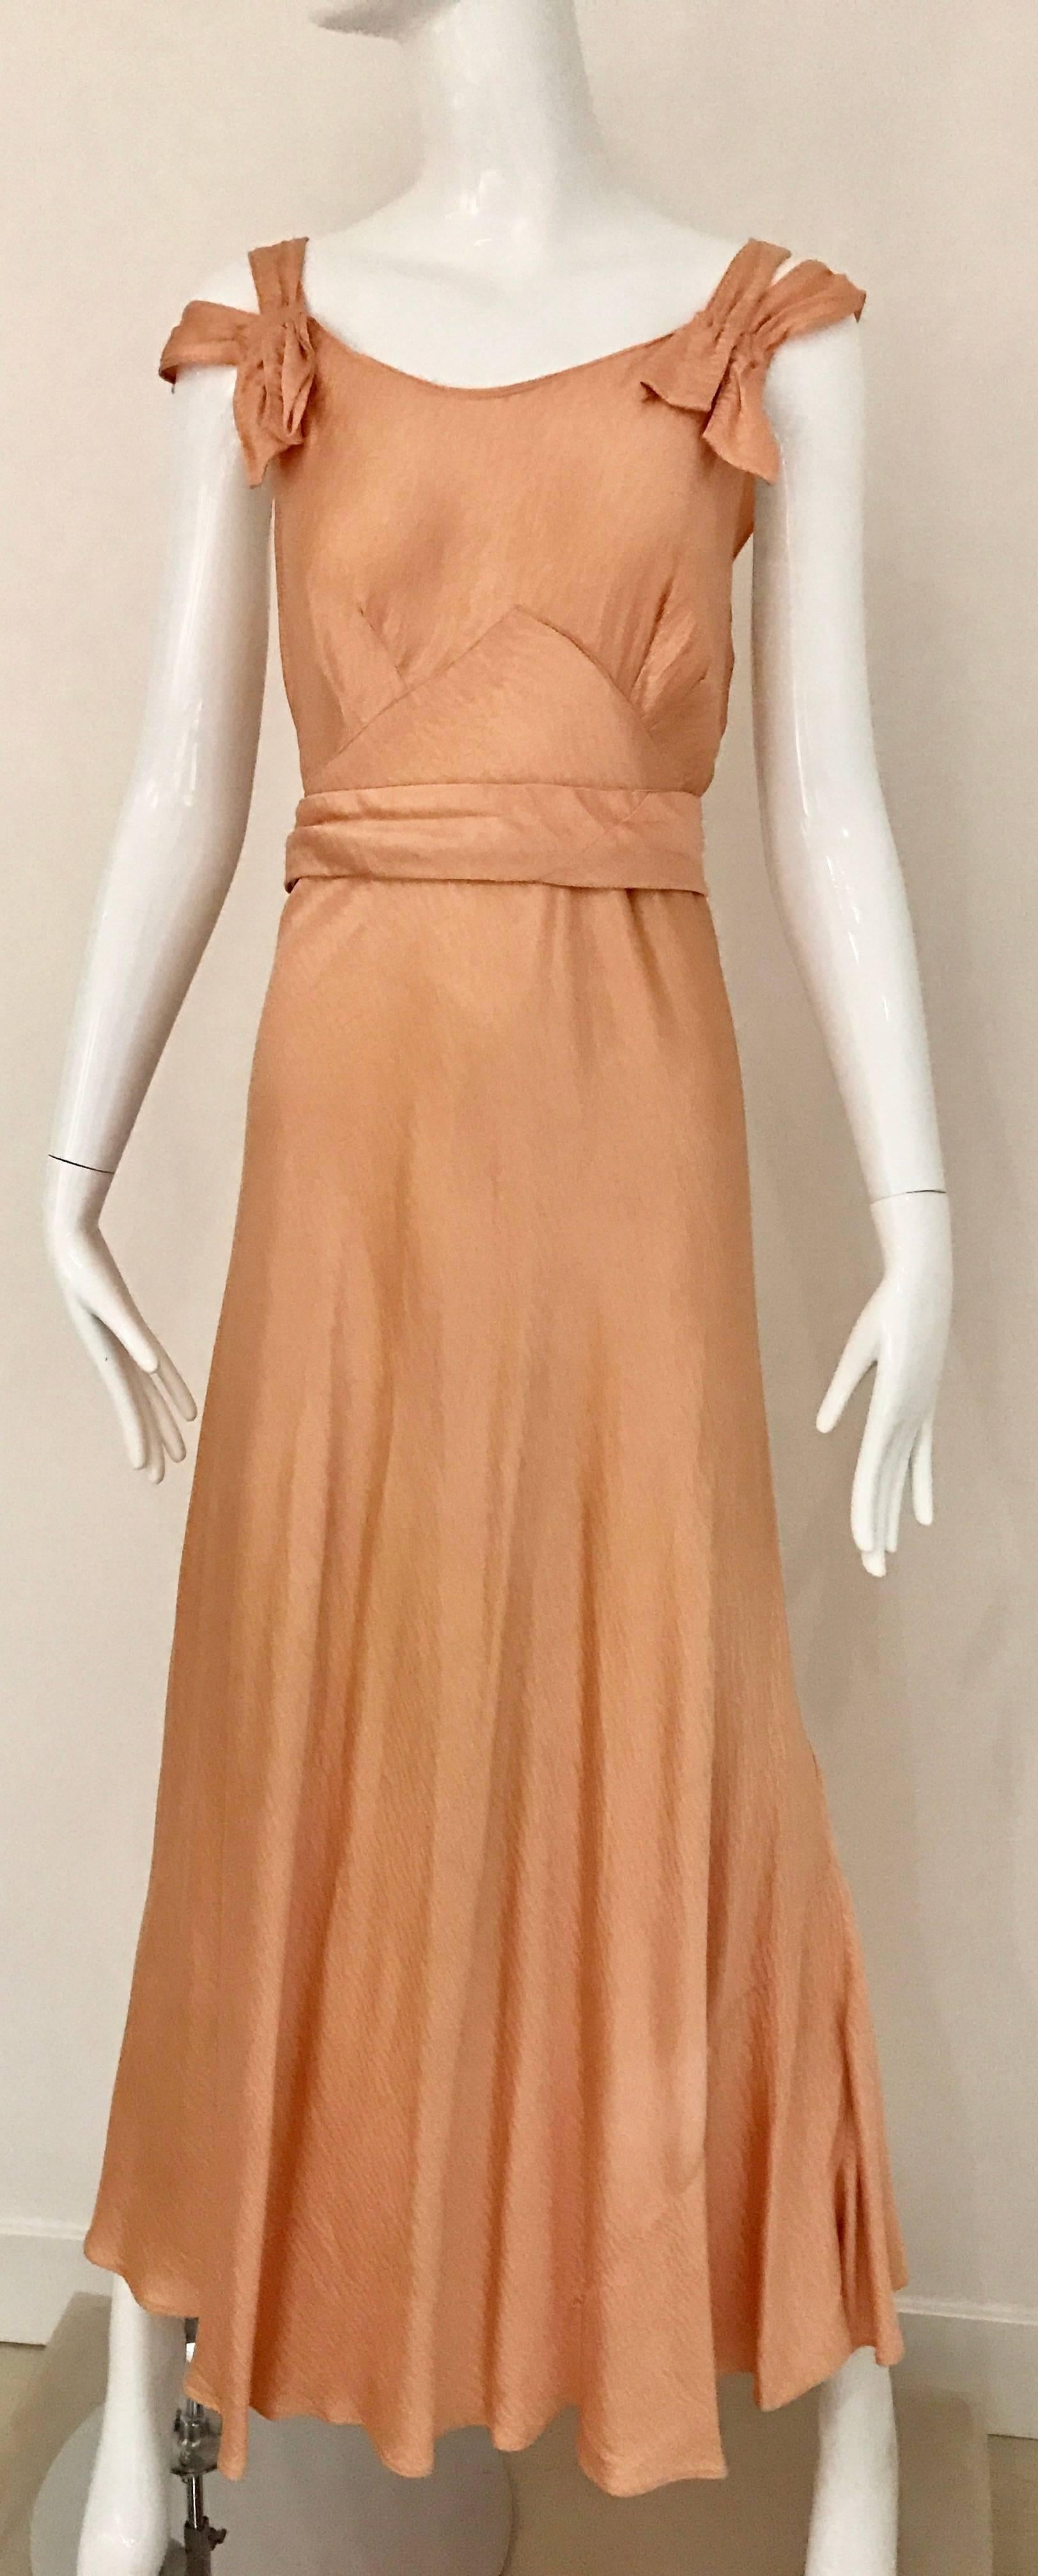 Beautiful 1930s peach silk spaghetti strap bias cut dress with trains at the back. Dress comes with capelet shawl. 
Dress fit size 2/4 small
Cape fit size 4/6
**small stains see image attached